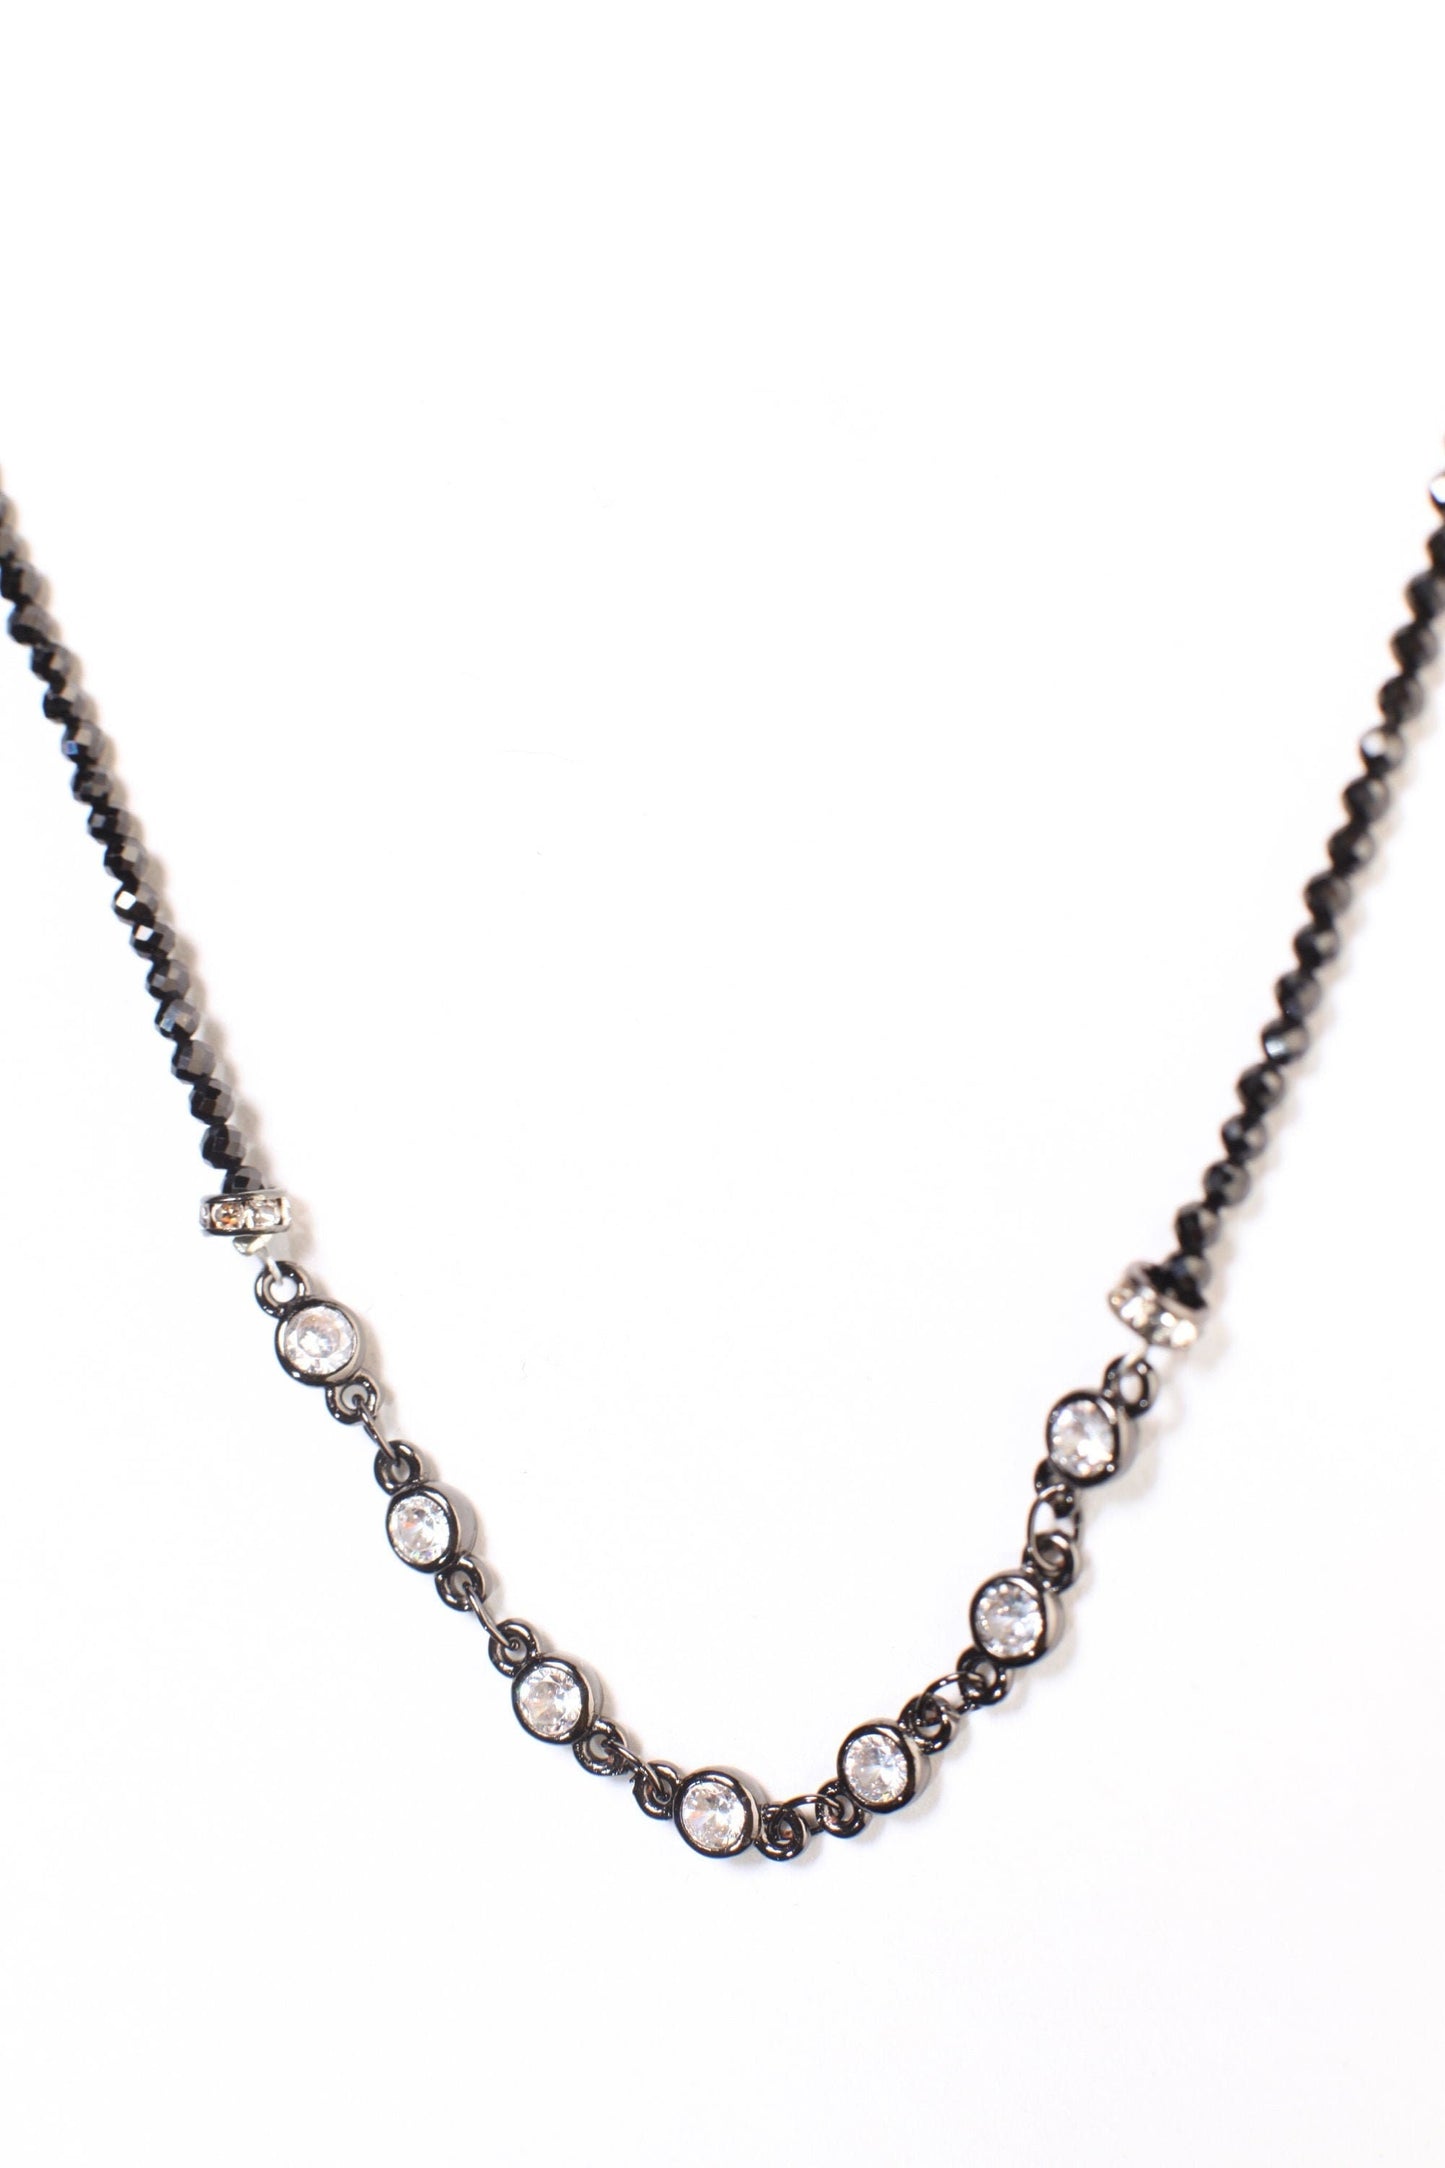 Black Spinel Diamond Cut Choker Necklace with 4mm Cubic Zirconia Disk and Rhinestone Spacers Necklace